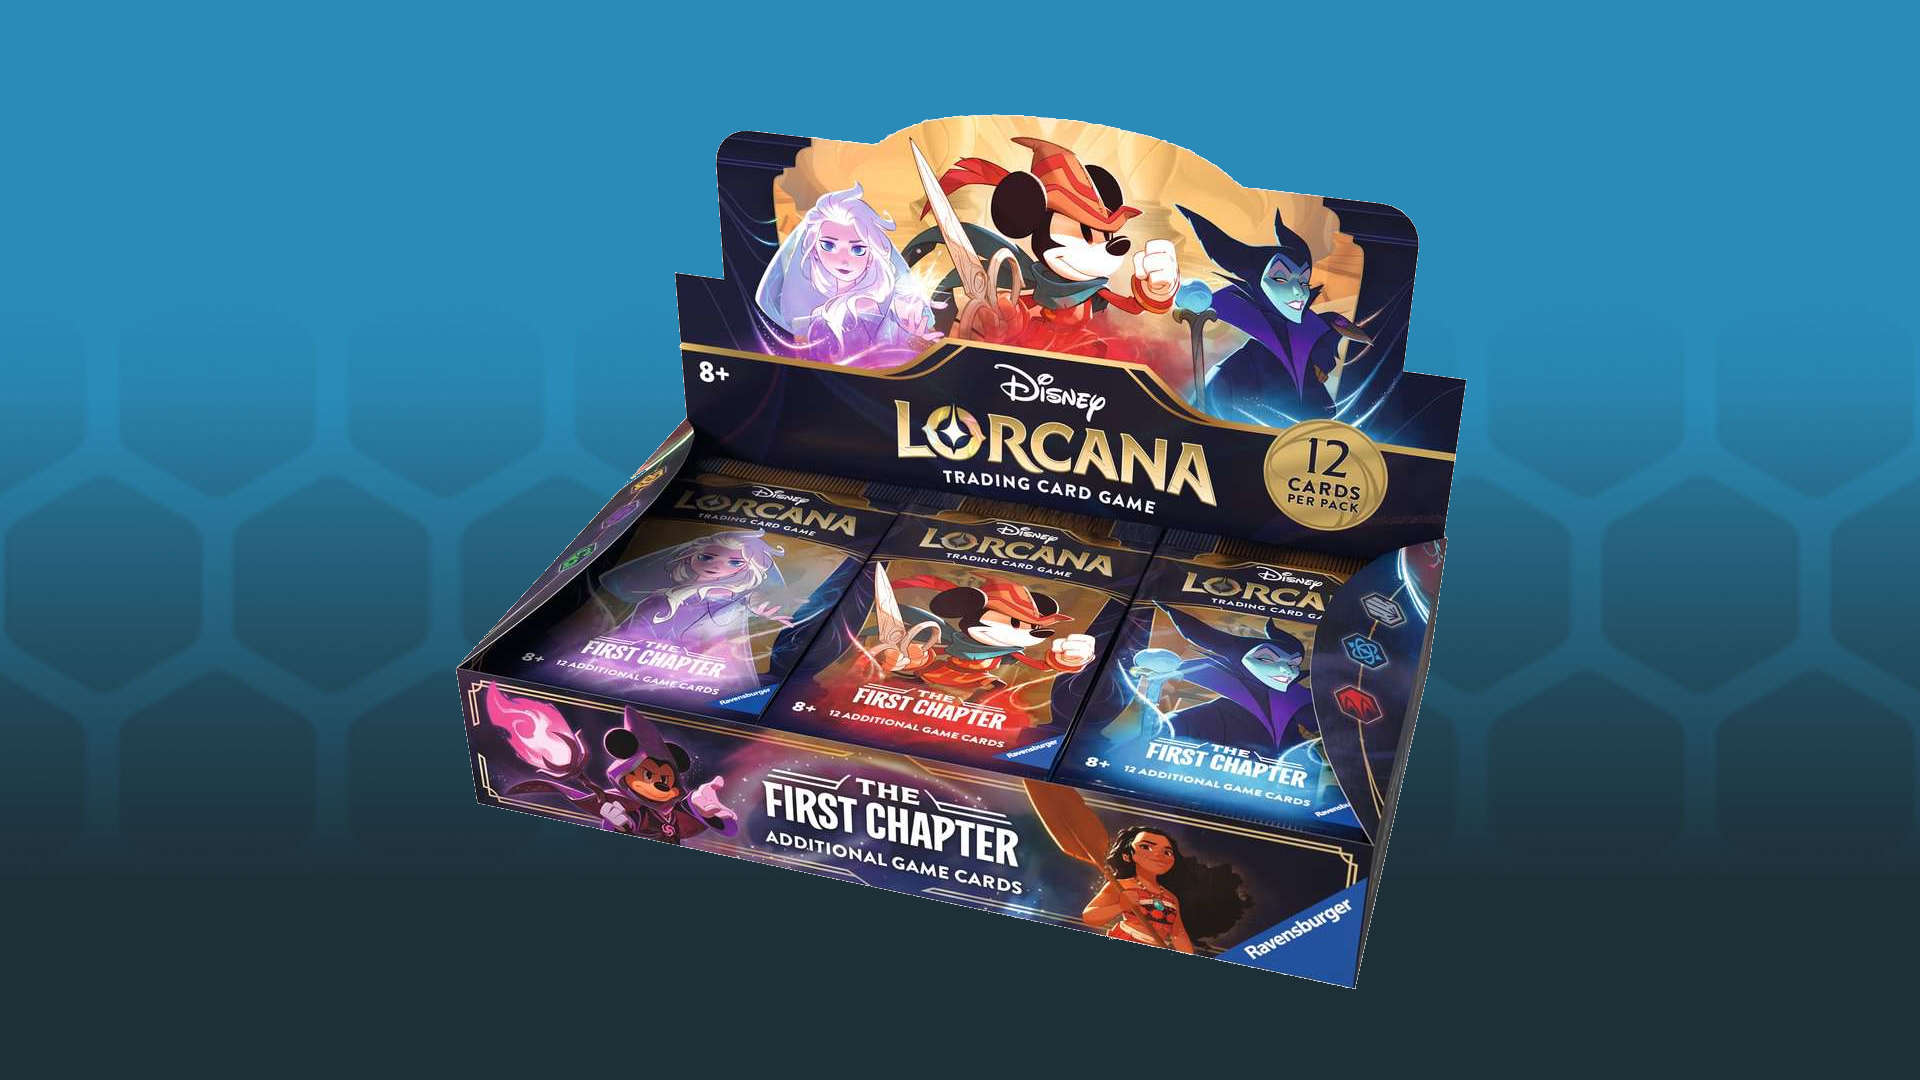 Disney Lorcana sets – all the starter decks and booster boxes